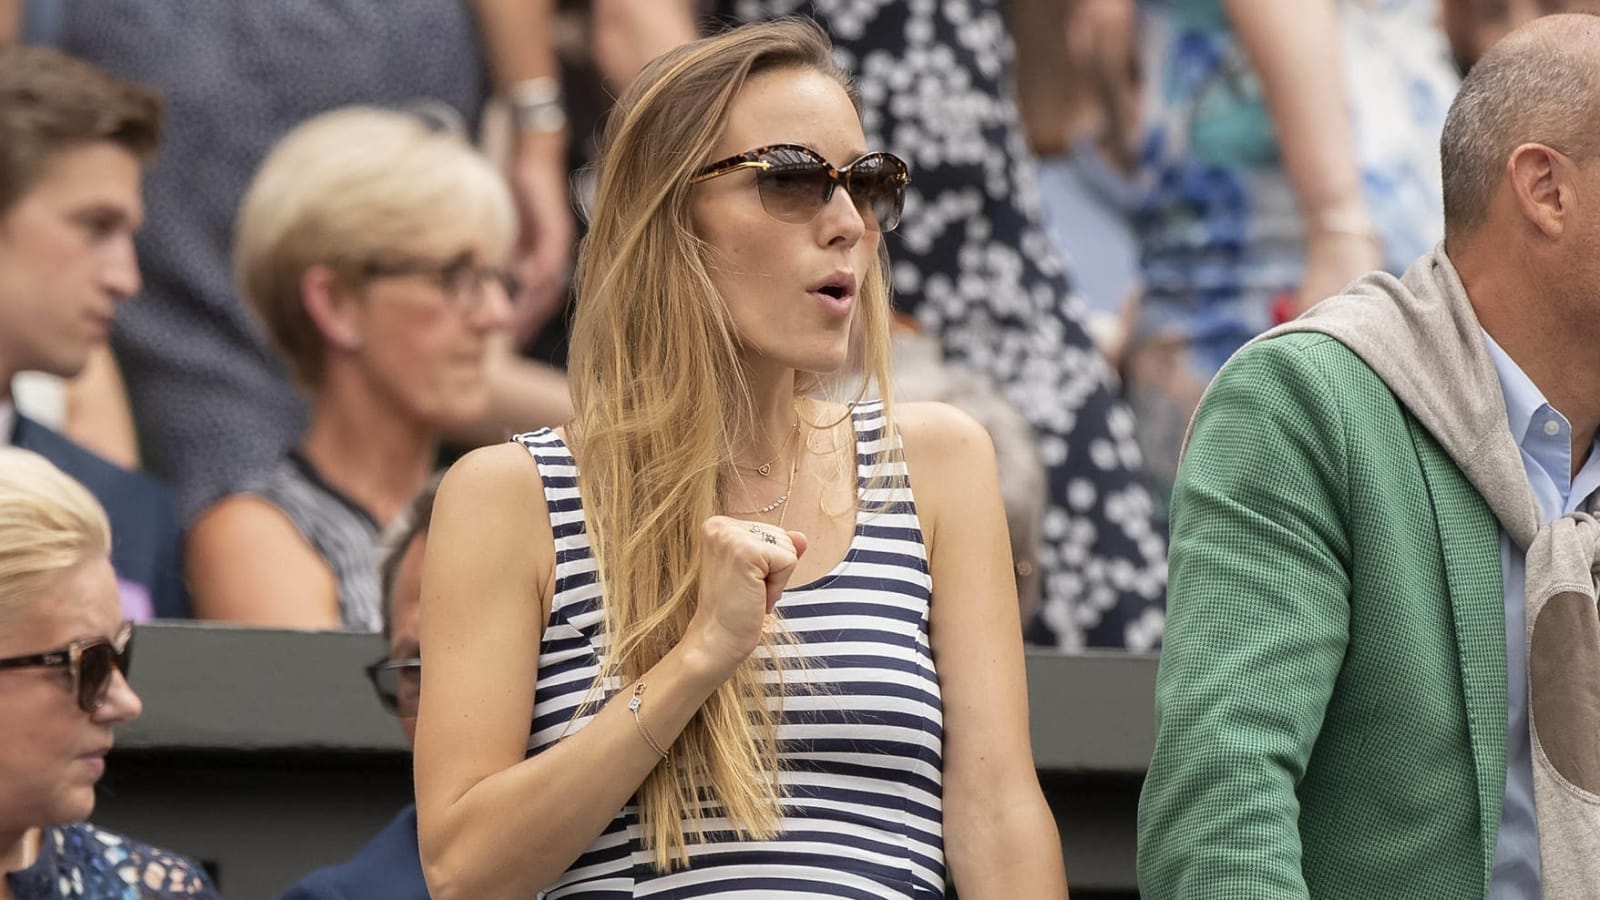 Jelena Djokovic was pumped as Nole reaches French Open final